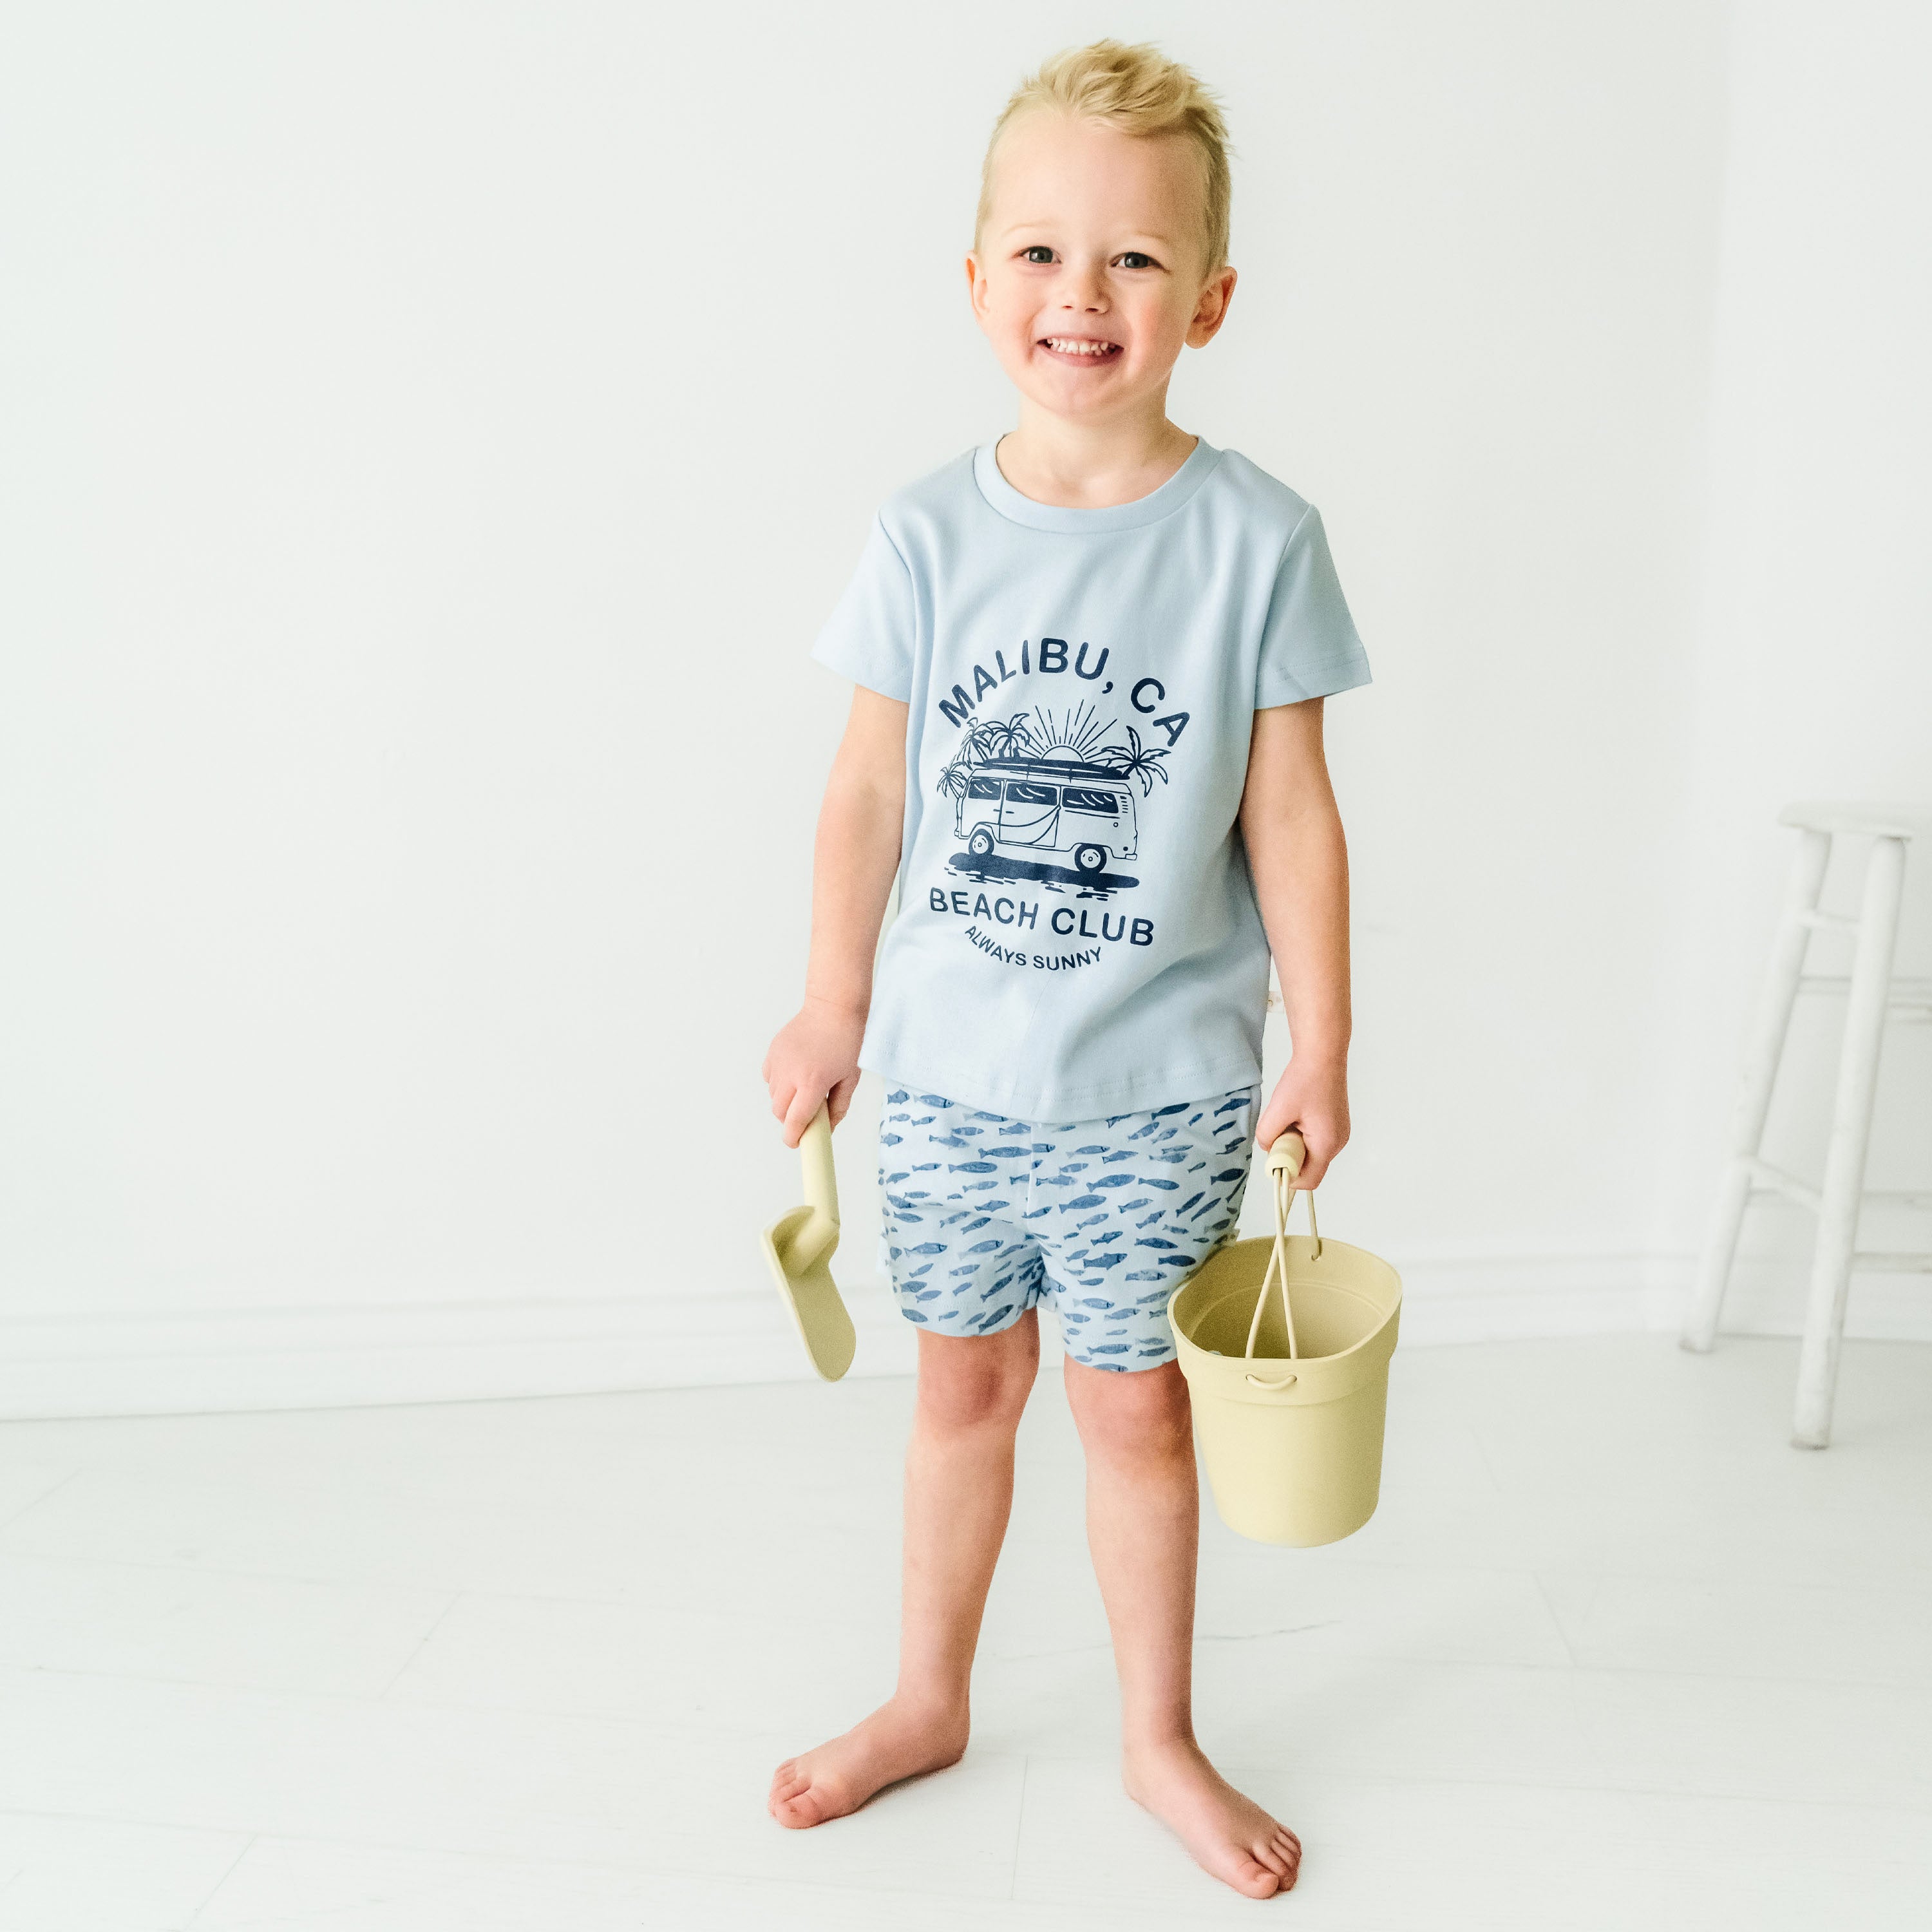 A joyful toddler boy standing in a white studio, wearing a Malibu Beach Club Organic Crew Neck Tee and blue patterned shorts, holding a yellow sand scoop and a pale yellow bucket.